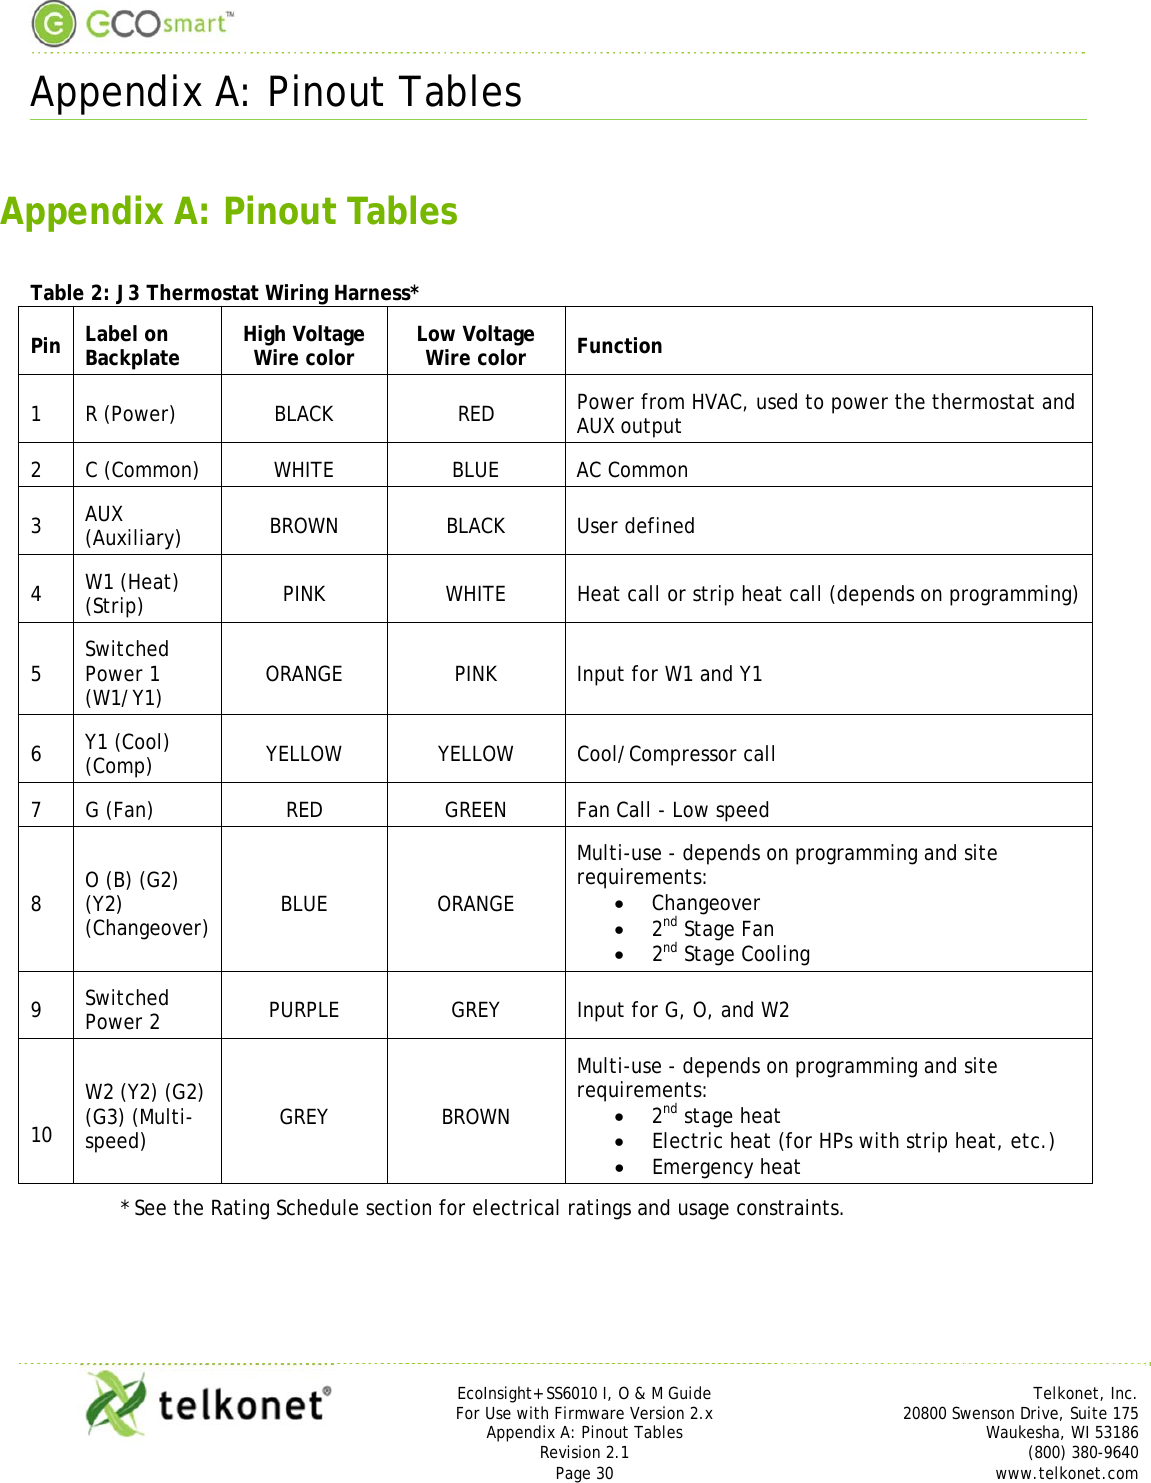  Appendix A: Pinout Tables     EcoInsight+ SS6010 I, O &amp; M Guide Telkonet, Inc. For Use with Firmware Version 2.x 20800 Swenson Drive, Suite 175 Appendix A: Pinout Tables Waukesha, WI 53186 Revision 2.1   (800) 380-9640 Page 30  www.telkonet.com  Appendix A: Pinout Tables  Table 2: J3 Thermostat Wiring Harness* Pin  Label on Backplate  High Voltage Wire color  Low Voltage Wire color  Function 1 R (Power)  BLACK  RED  Power from HVAC, used to power the thermostat and AUX output 2  C (Common)  WHITE  BLUE  AC Common 3  AUX (Auxiliary)  BROWN BLACK User defined 4  W1 (Heat) (Strip)  PINK  WHITE  Heat call or strip heat call (depends on programming) 5  Switched Power 1 (W1/Y1)  ORANGE  PINK  Input for W1 and Y1 6  Y1 (Cool) (Comp)  YELLOW YELLOW Cool/Compressor call 7  G (Fan)  RED  GREEN  Fan Call - Low speed 8  O (B) (G2) (Y2) (Changeover)  BLUE ORANGE Multi-use - depends on programming and site requirements:  Changeover  2nd Stage Fan  2nd Stage Cooling 9  Switched Power 2  PURPLE  GREY  Input for G, O, and W2  10 W2 (Y2) (G2) (G3) (Multi-speed)  GREY BROWN Multi-use - depends on programming and site requirements:  2nd stage heat  Electric heat (for HPs with strip heat, etc.)  Emergency heat * See the Rating Schedule section for electrical ratings and usage constraints.  